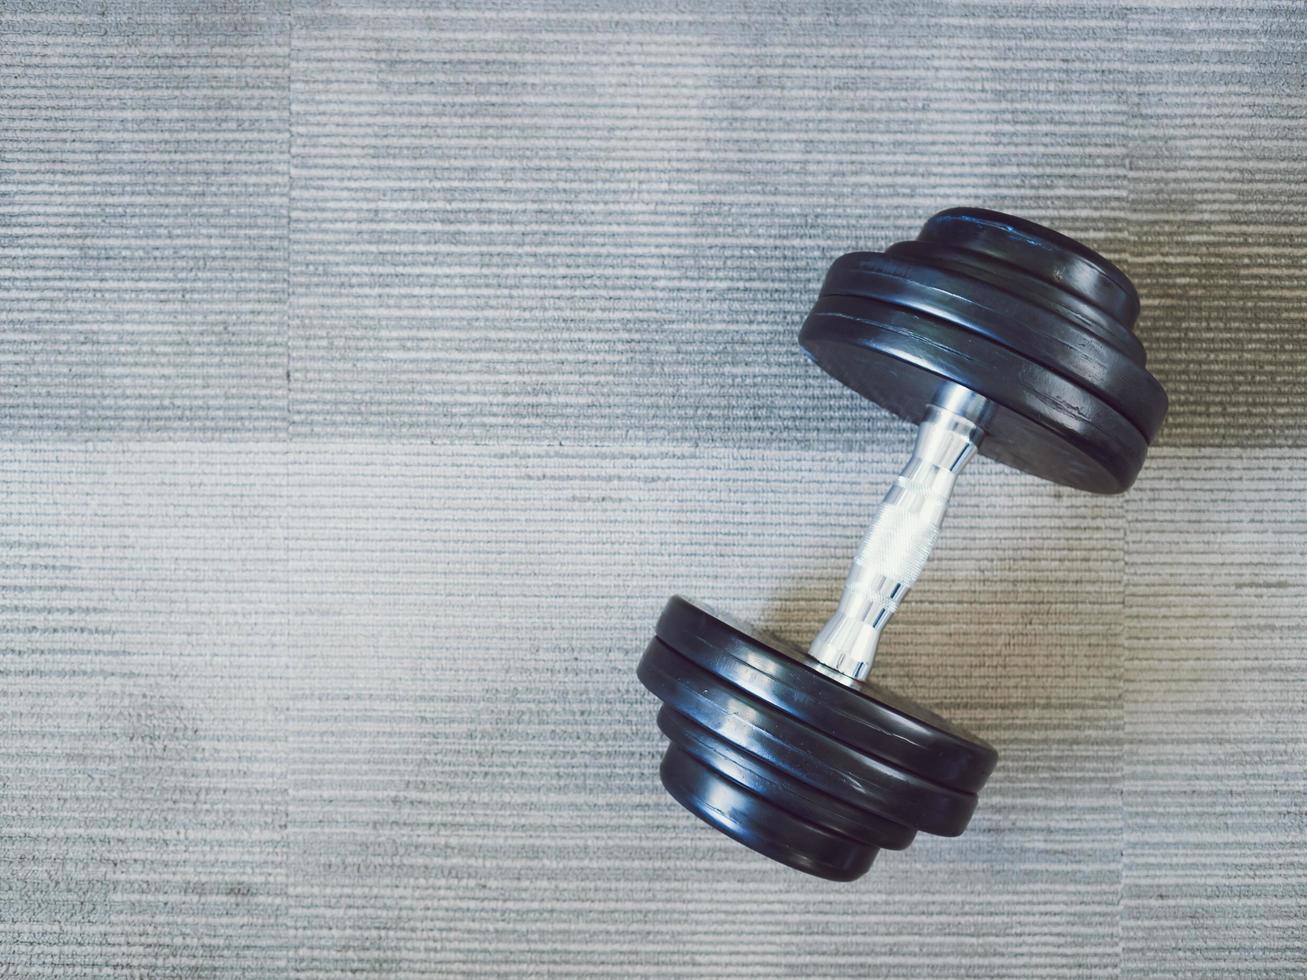 Dumbbell on the gym floor. photo